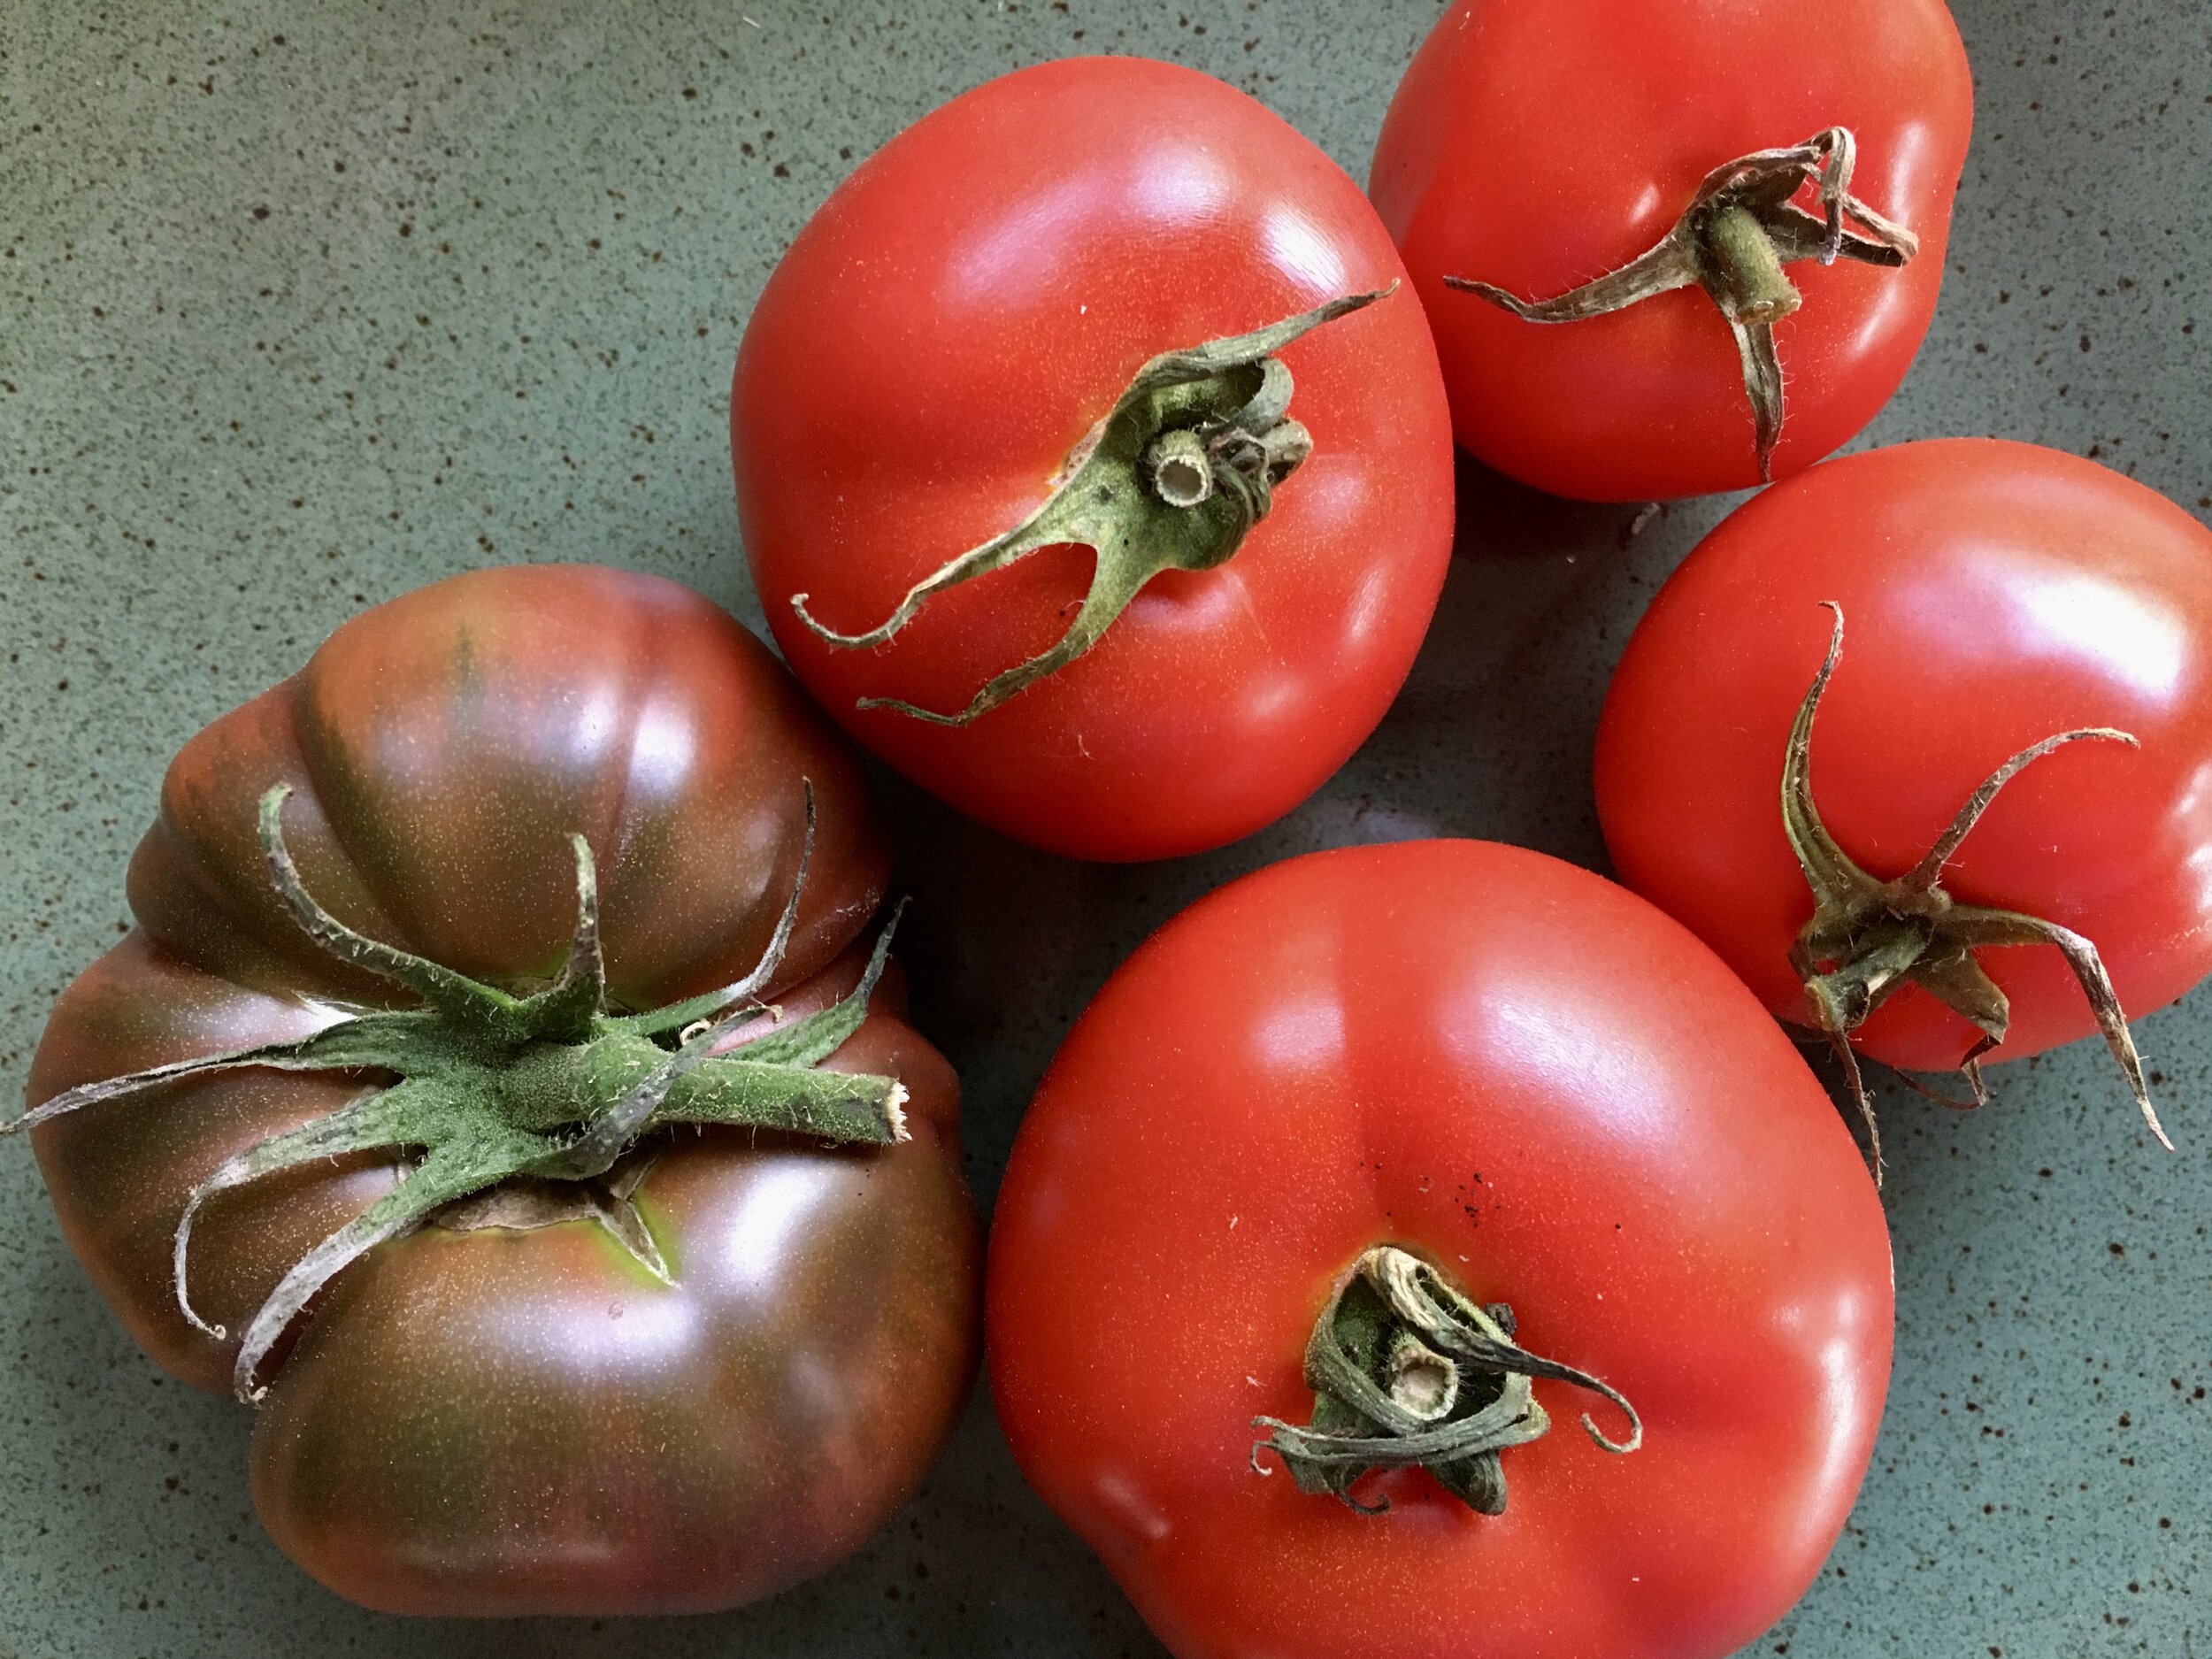 Planting Tomatoes in Coastal Southern California: How to Enjoy Fresh Tomatoes All Year Round